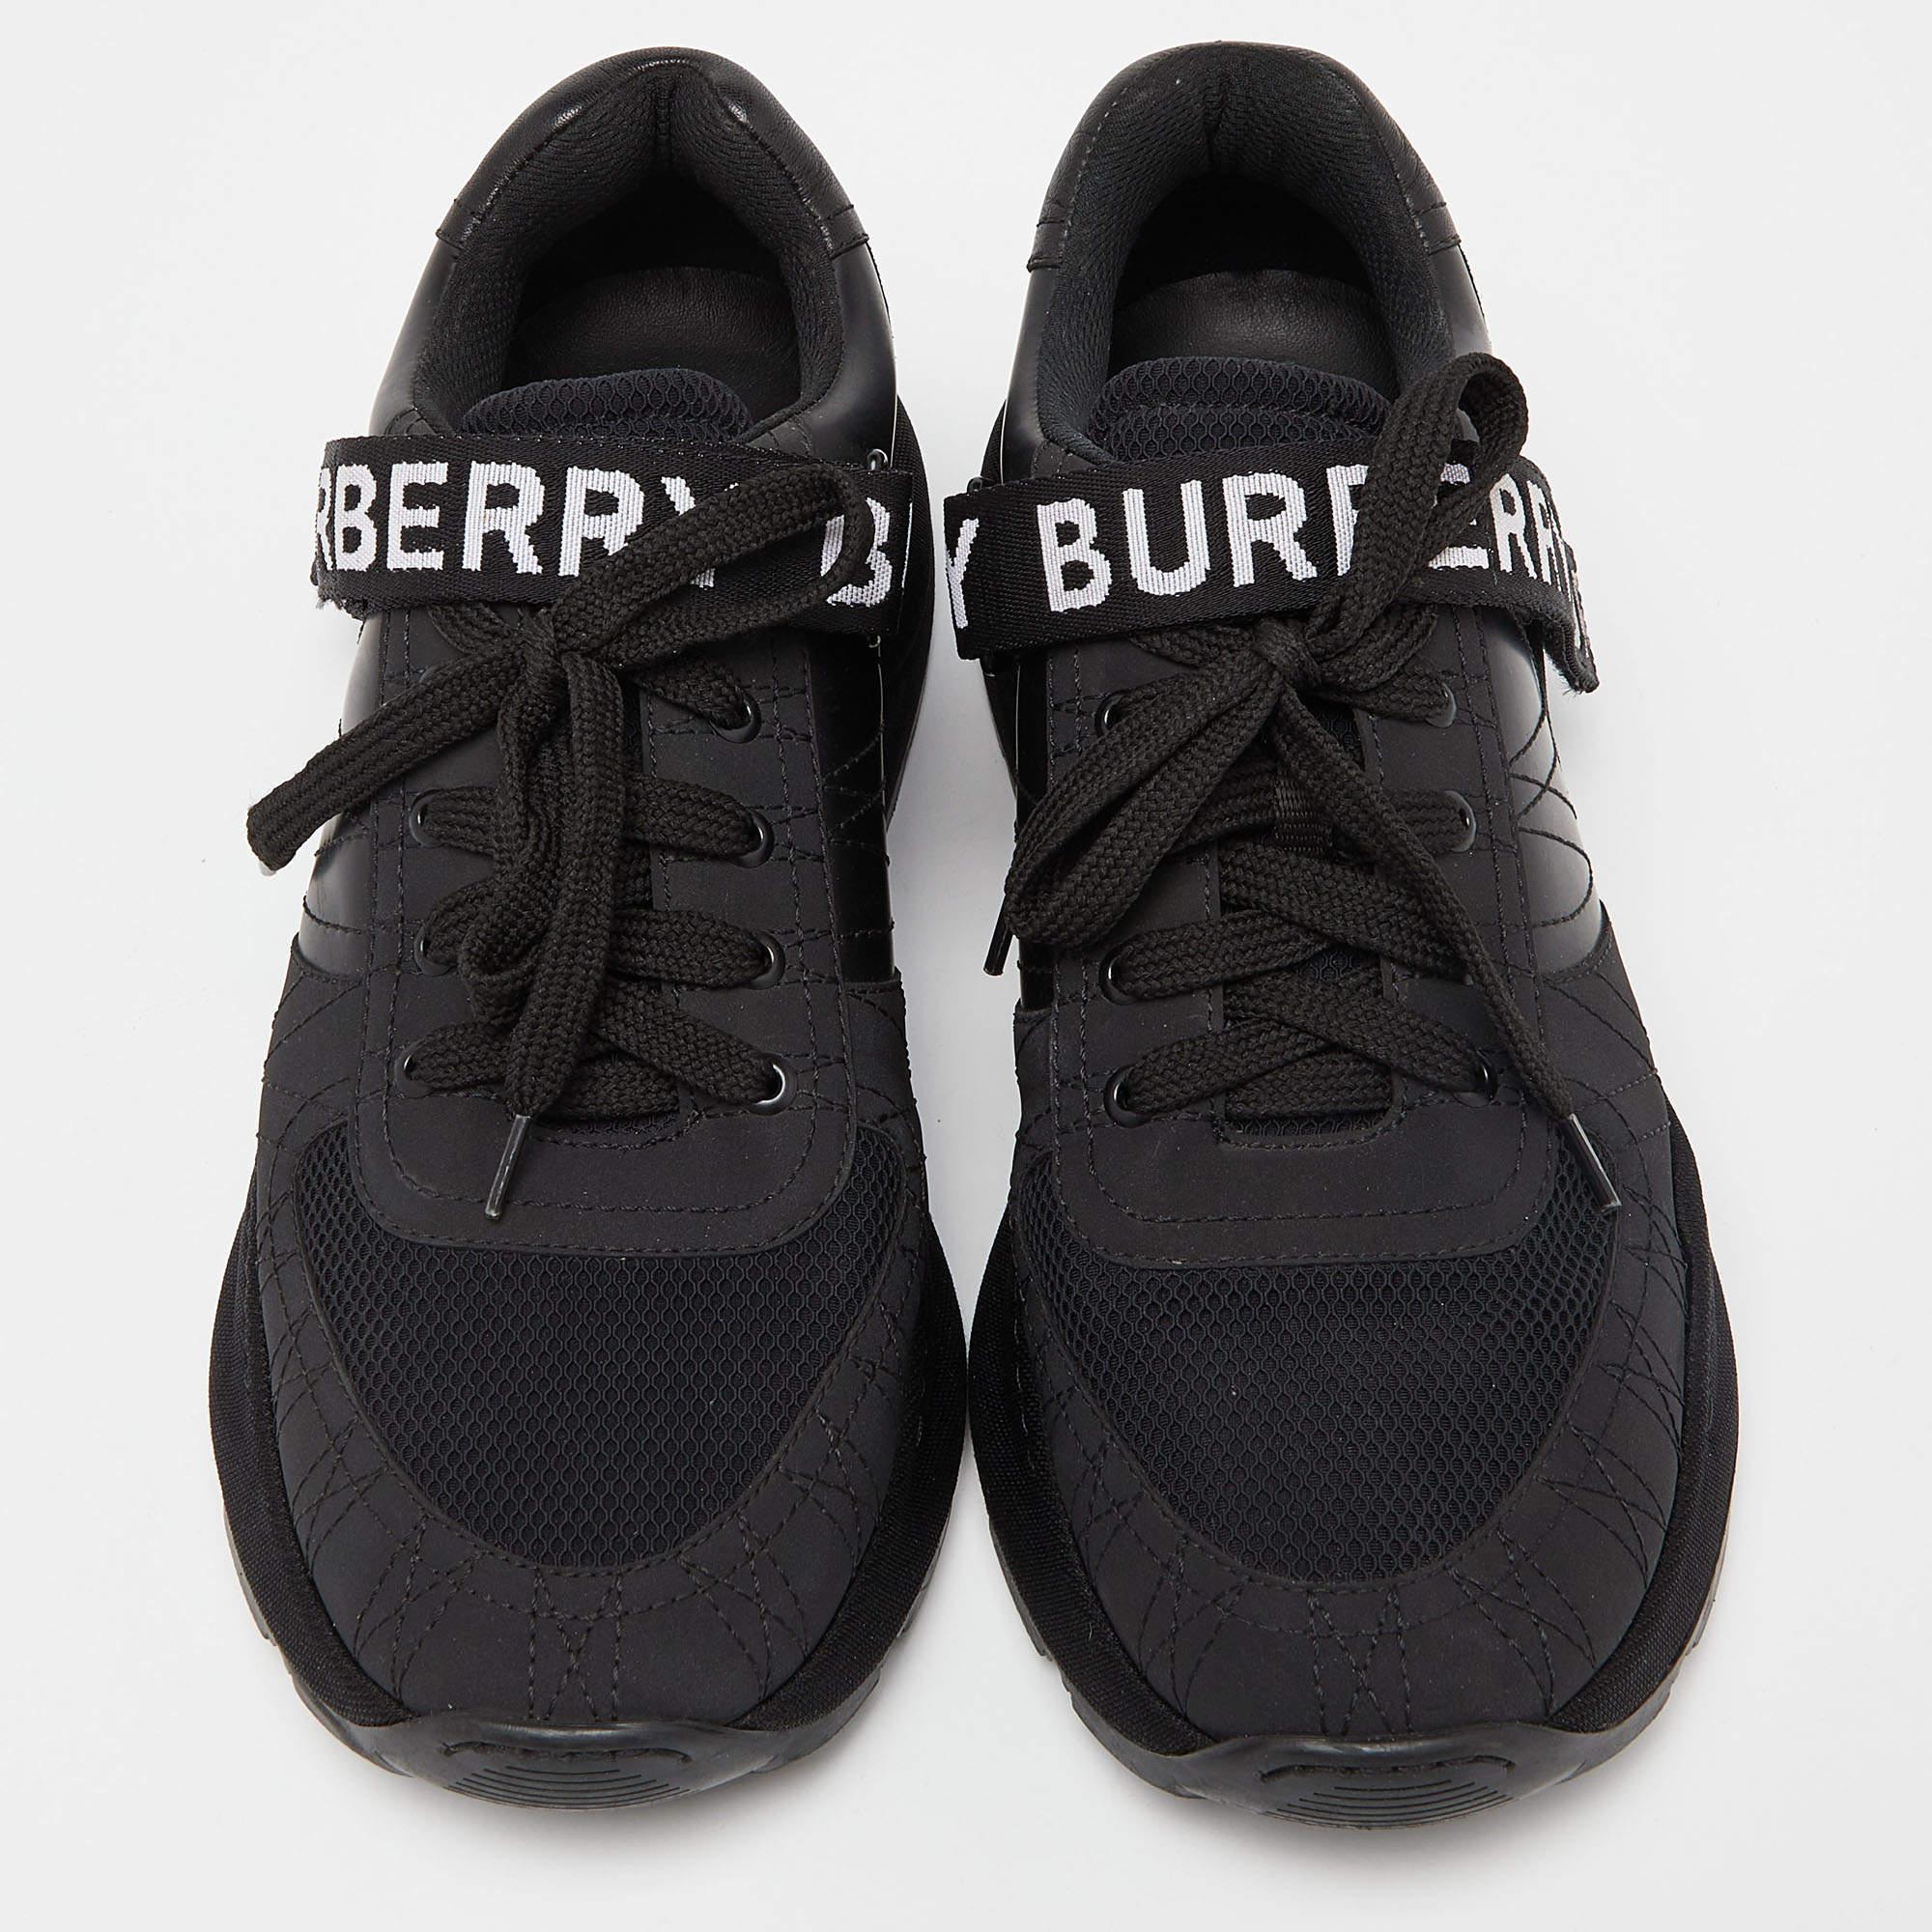 Designed to provide all the qualities of a good sneaker and much more, this pair by Burberry is a durable design formed with high-grade materials. It's a comfort-laden shoe that one can rely on every day.

